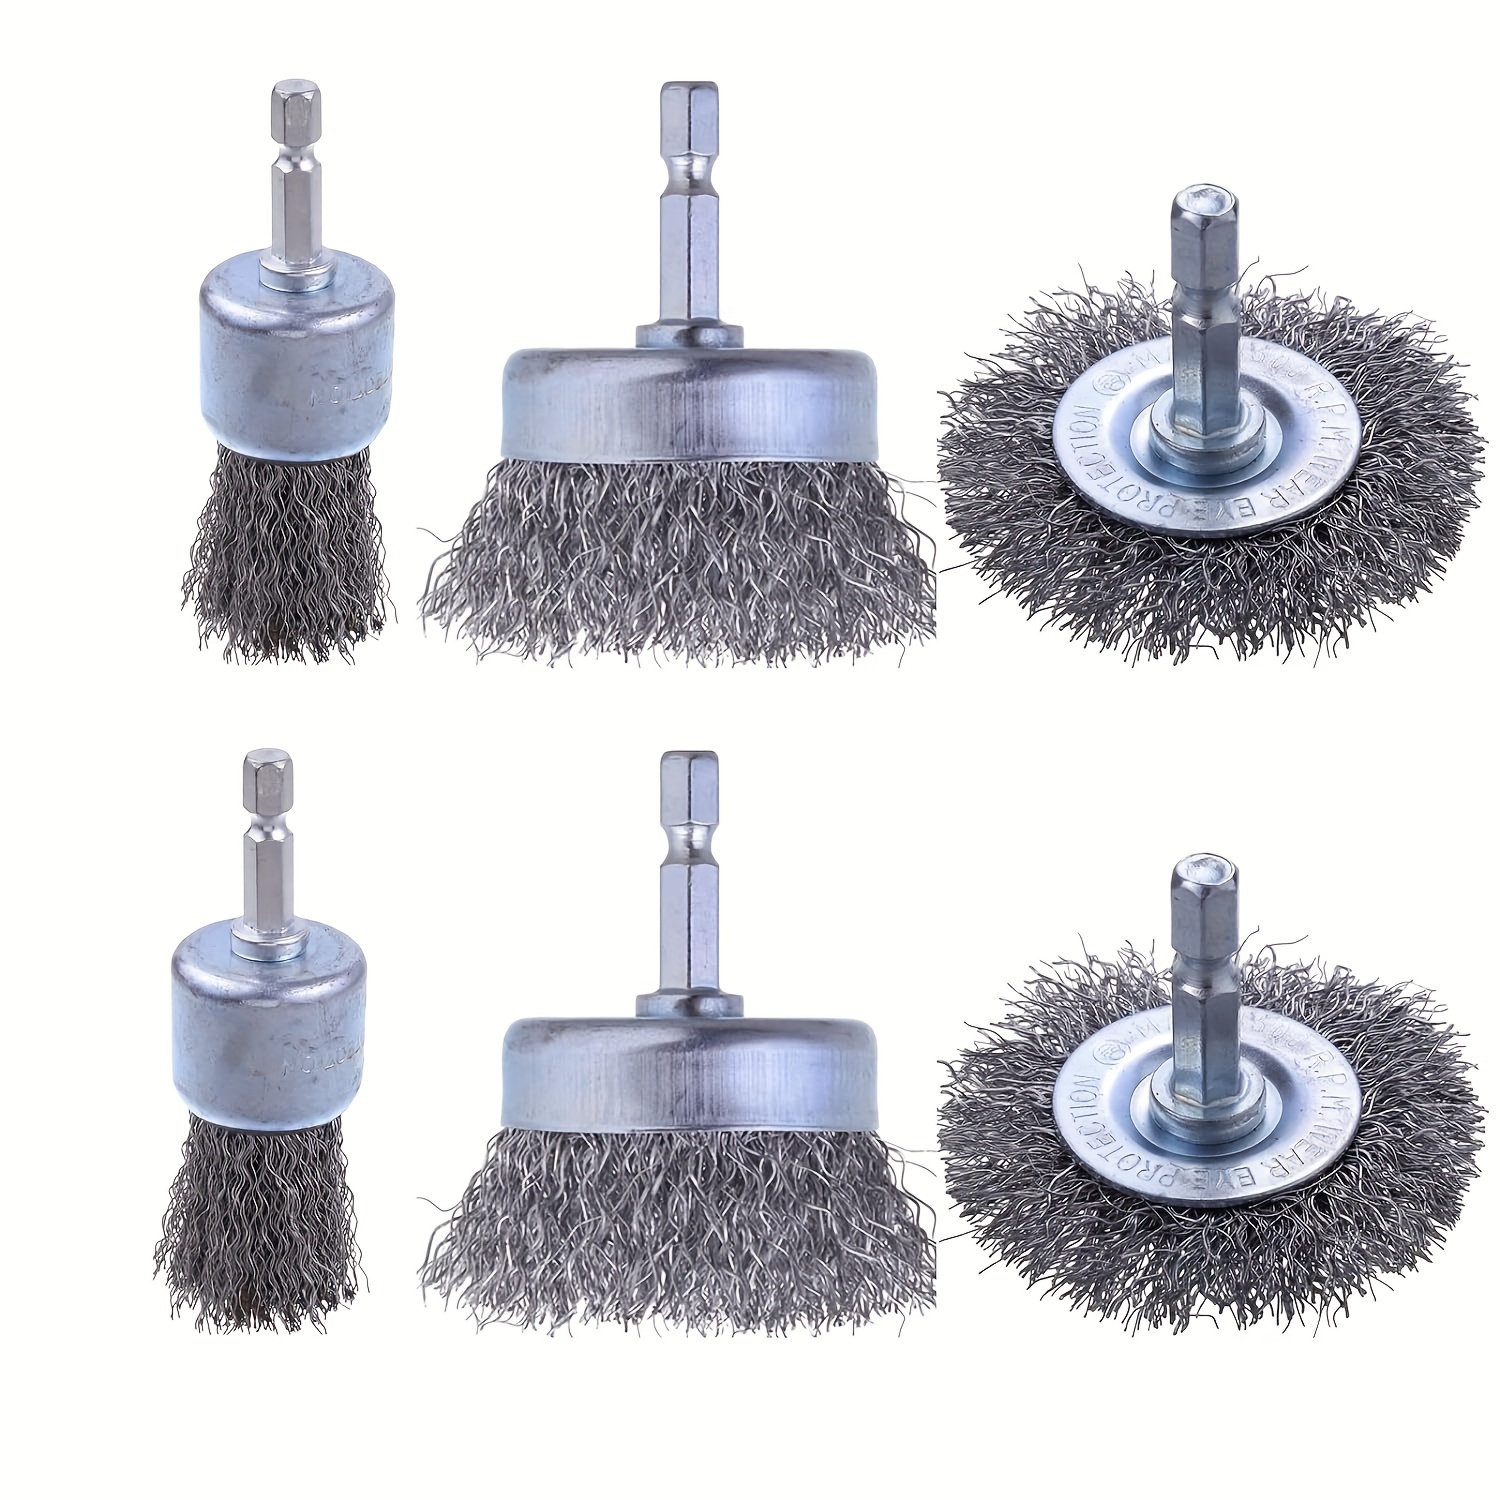 Carbon and Stainless Steel Cup Brushes